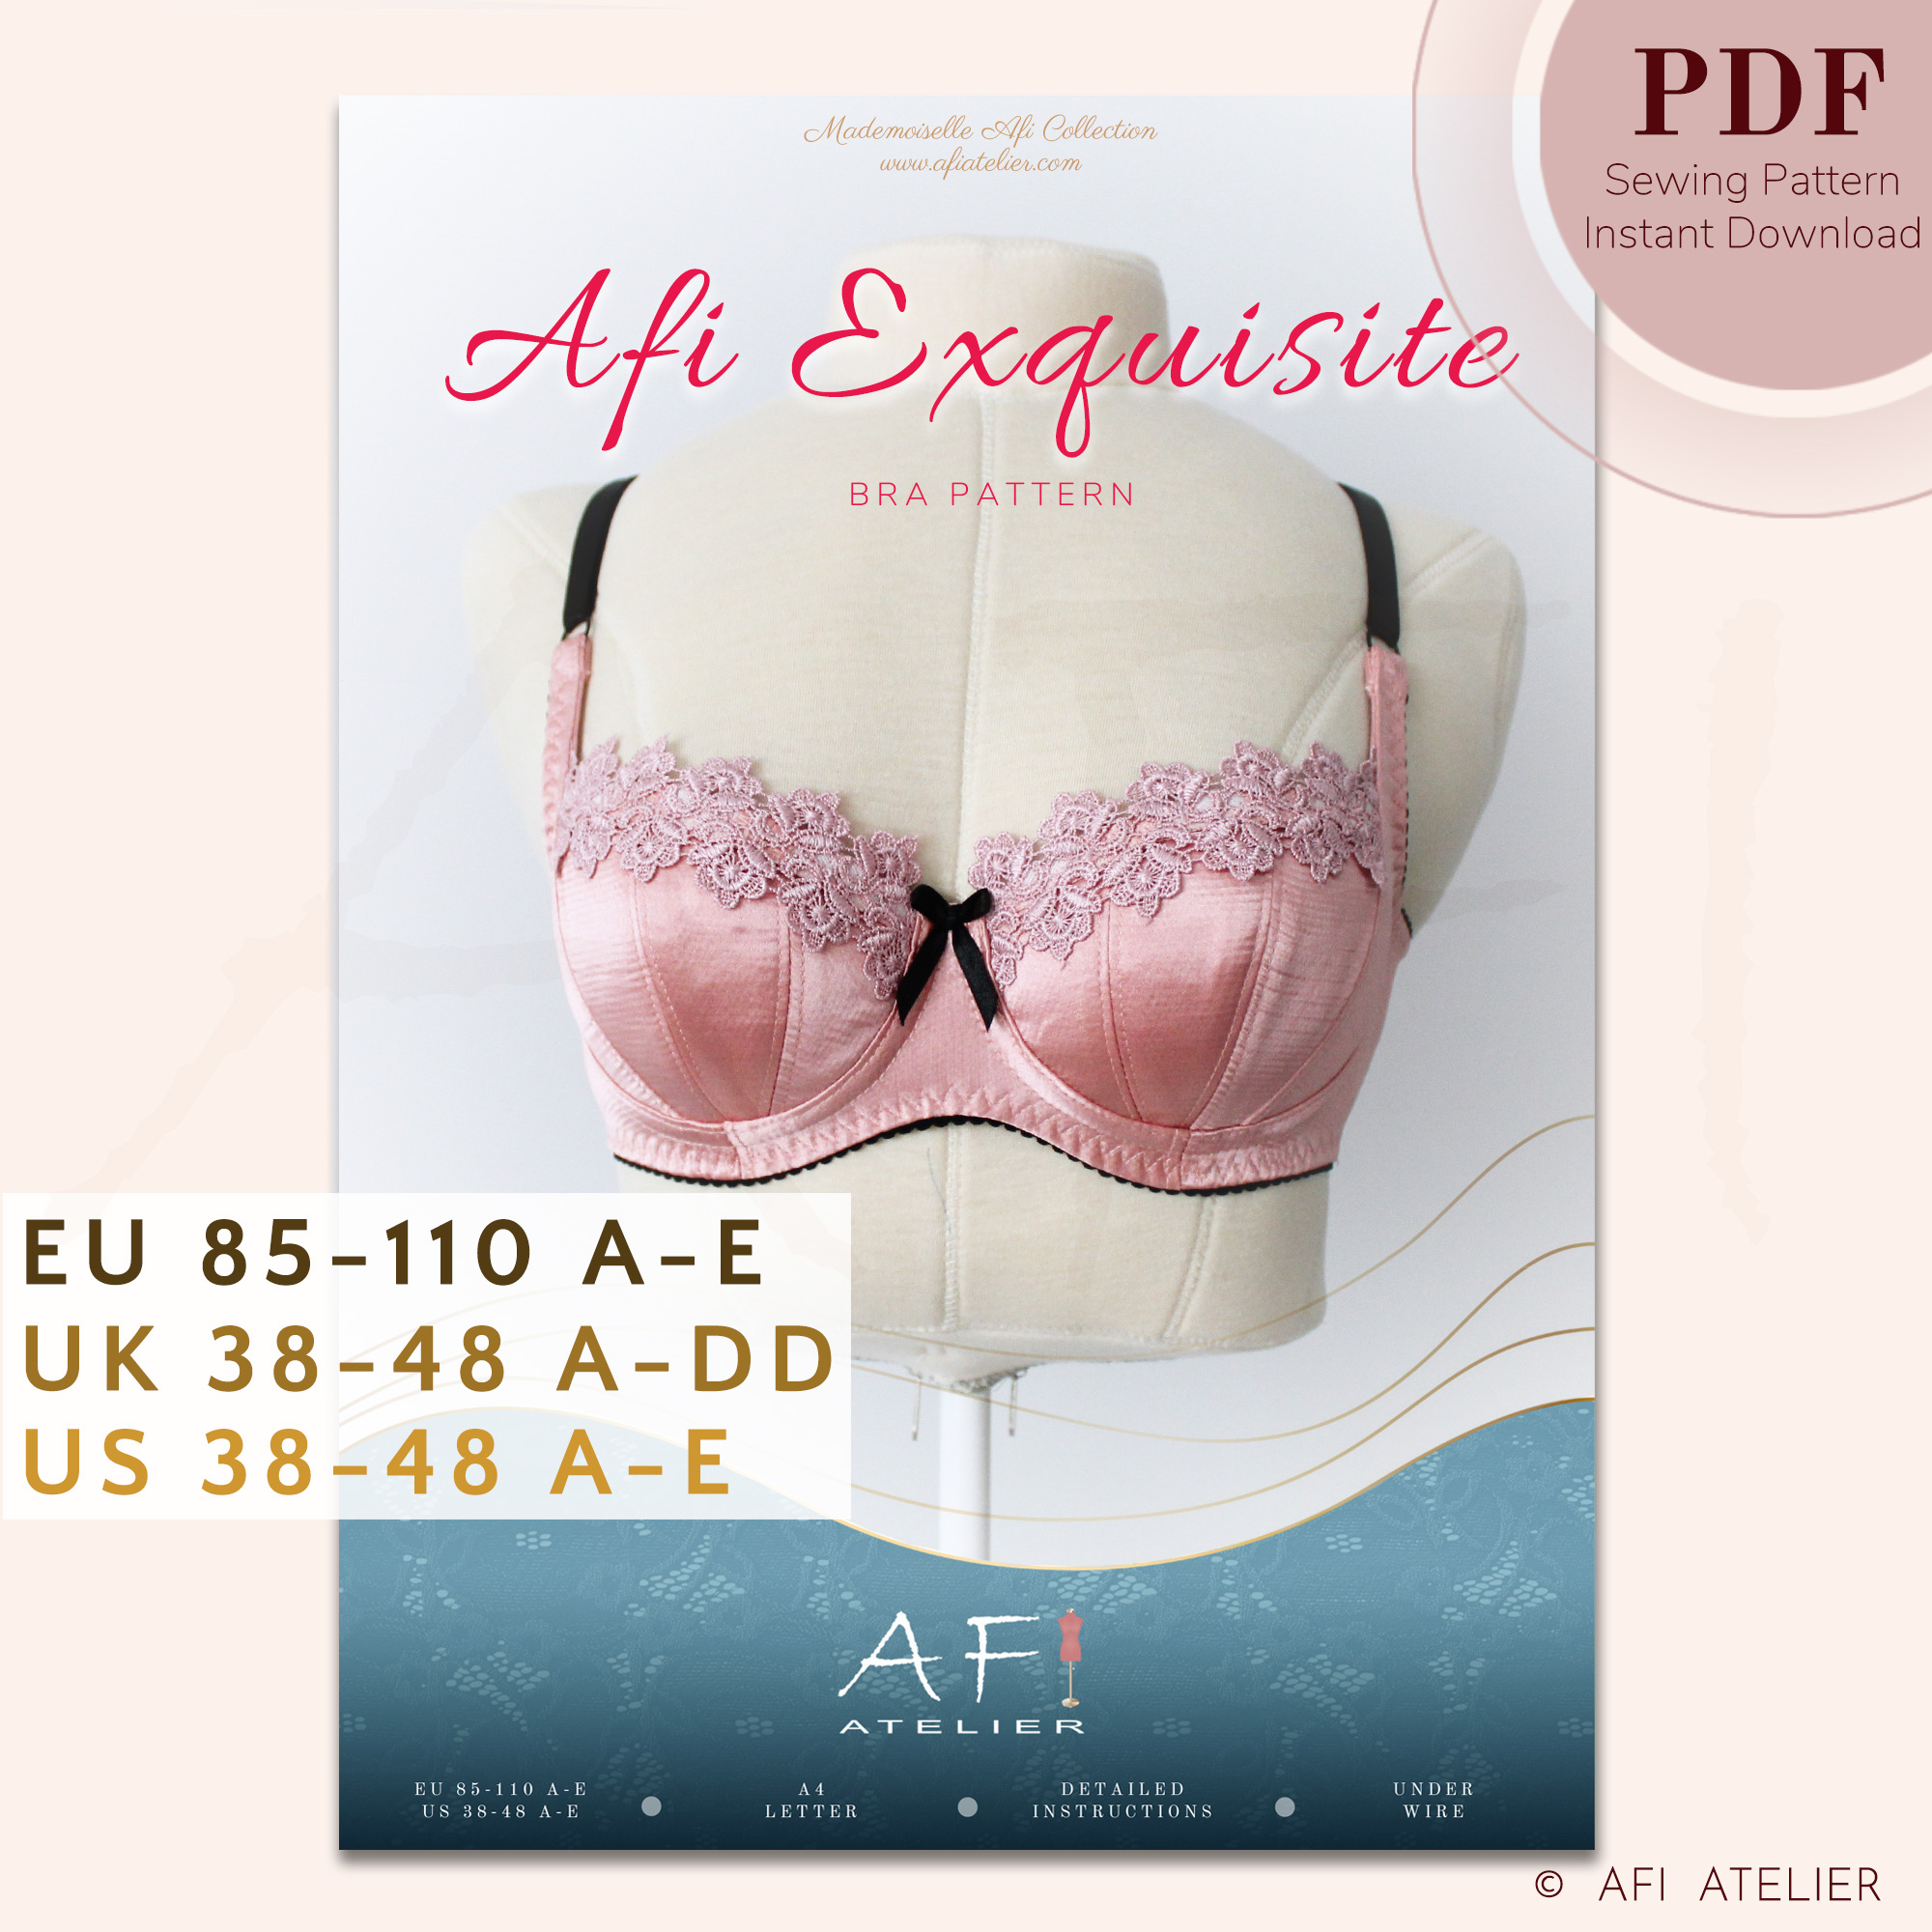 Instant Download PDF Lingerie Sewing Pattern for an Underwire